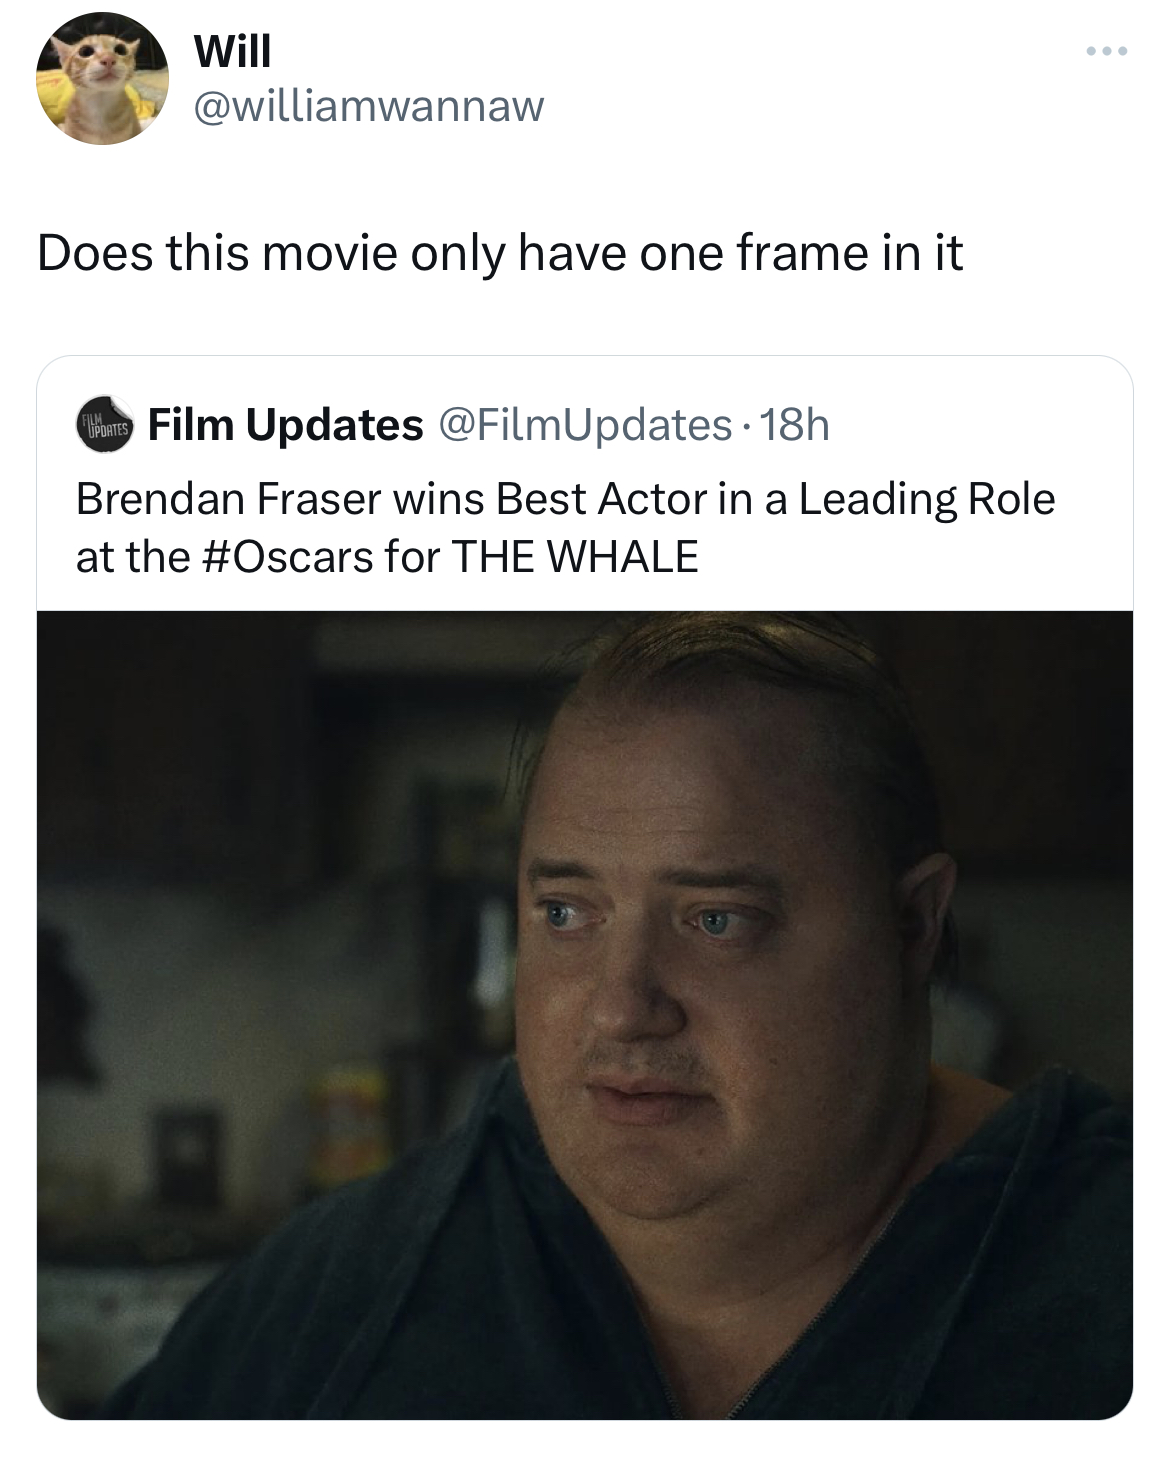 savage tweets - photo caption - Will Does this movie only have one frame in it Film Updates 18h Brendan Fraser wins Best Actor in a Leading Role at the for The Whale www